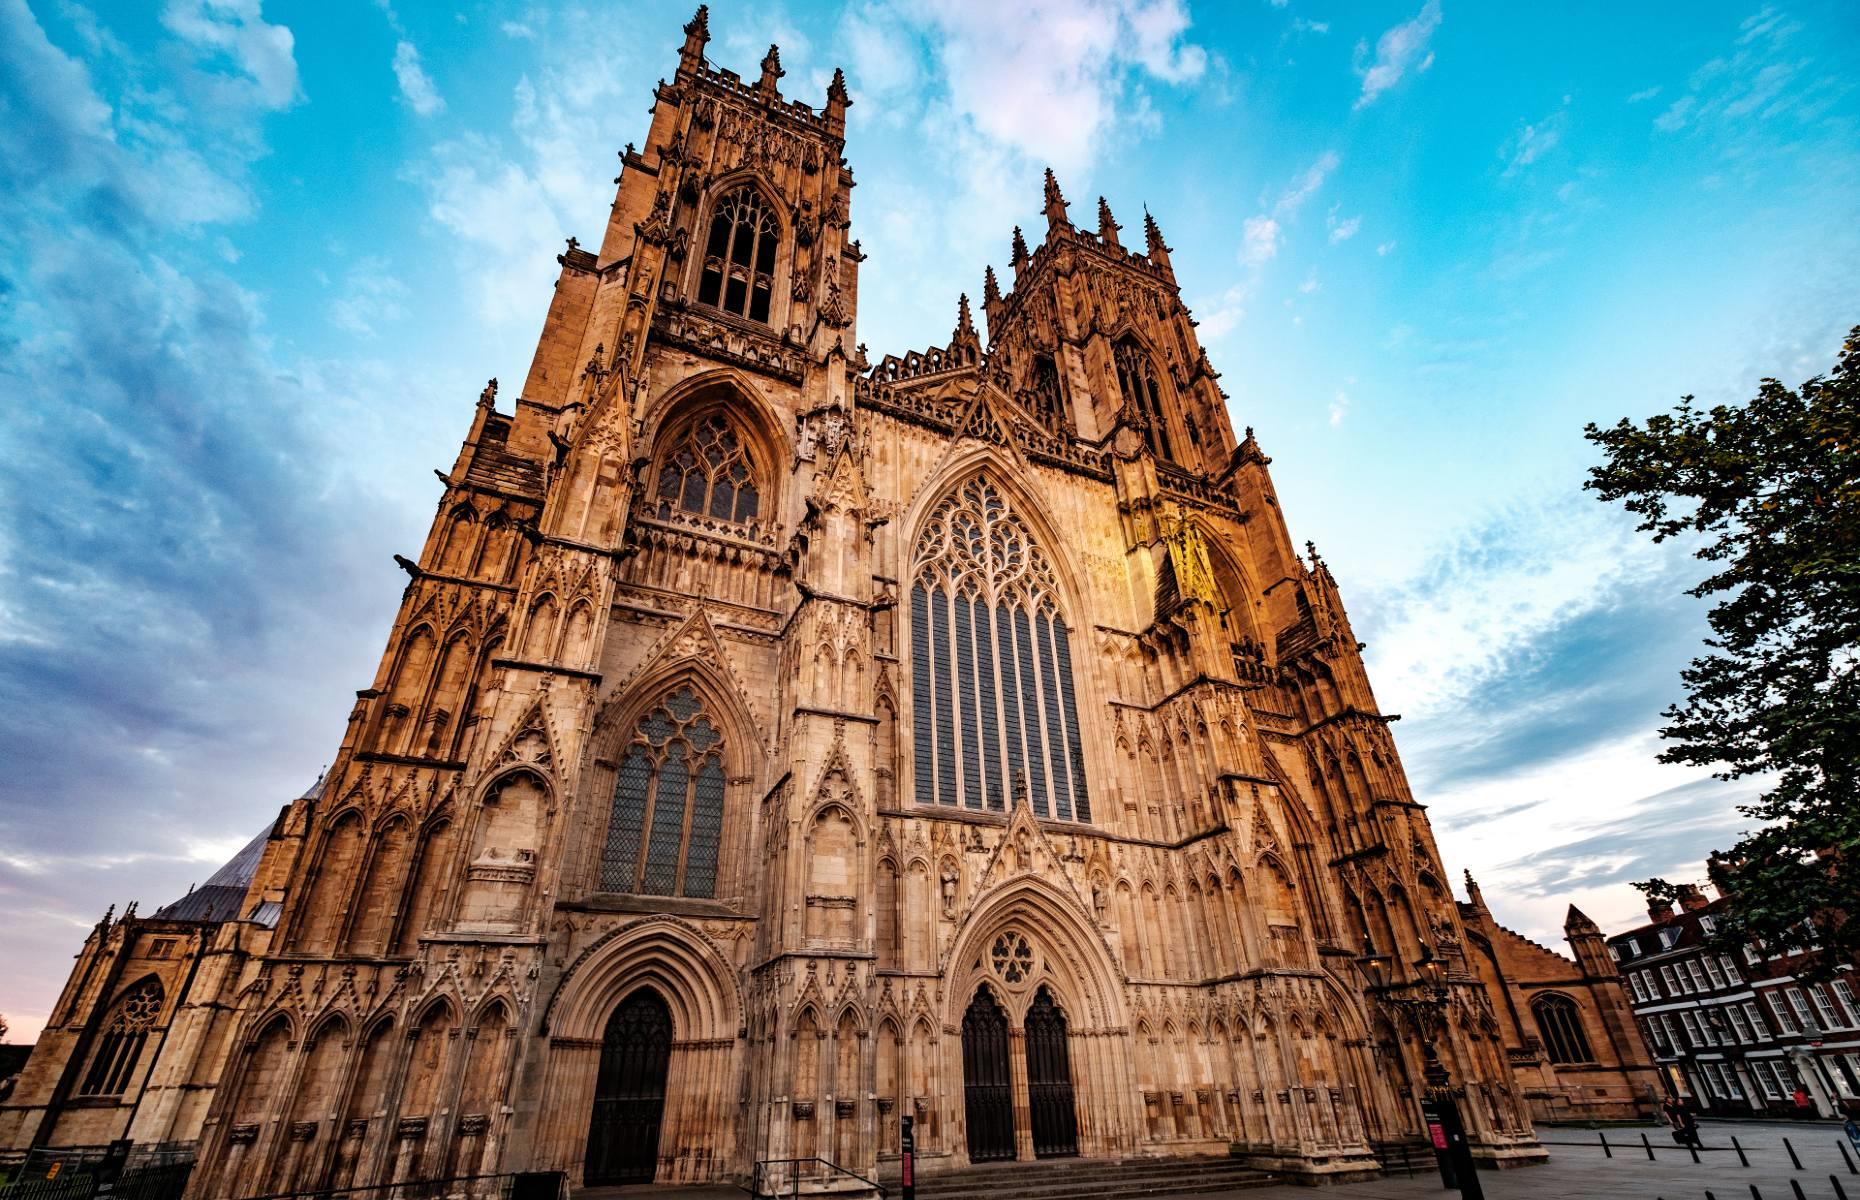 <p>Towering high above York, this magnificent Gothic building is one of the biggest medieval cathedrals in Europe. A masterpiece of stained glass and stone, its recently restored Great East Window dates back to 1405 and is the country’s largest example of medieval stained glass. <a href="https://yorkminster.org/">York Minster</a>’s stunning tower offers visitors incredible views across the historic city.</p>